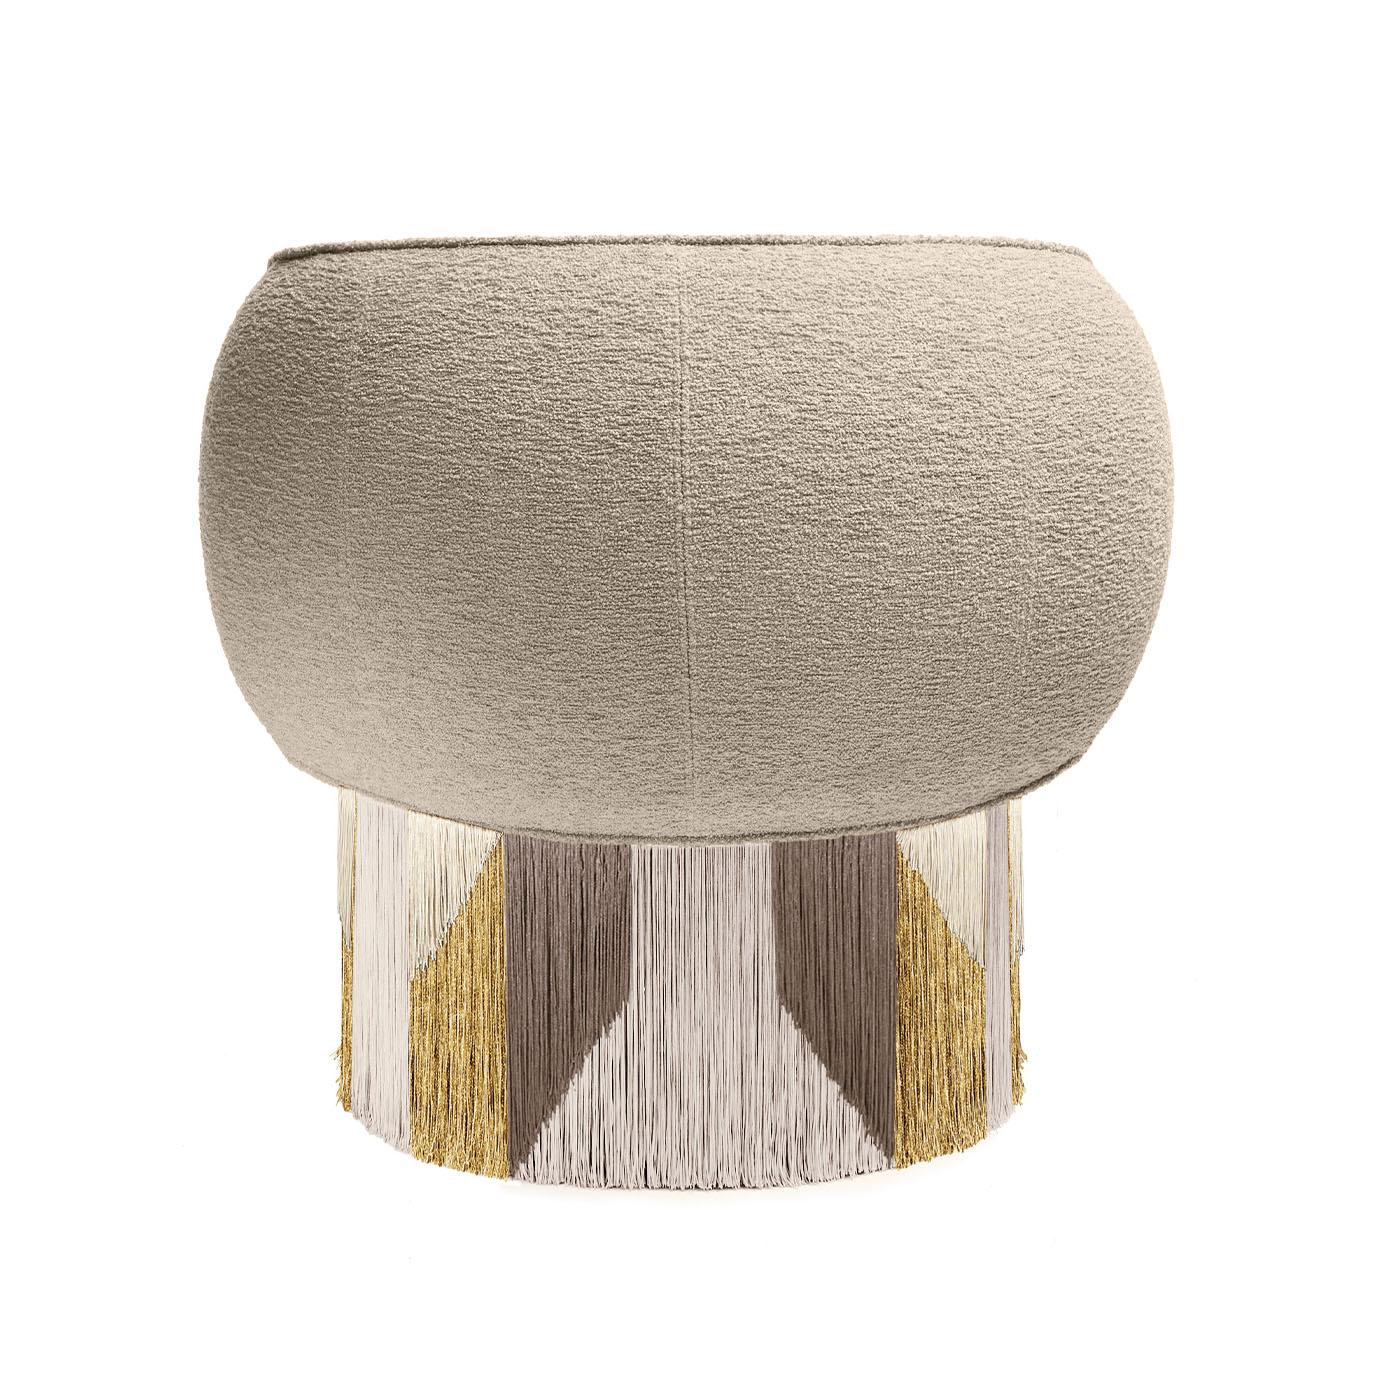 Tribal roots and sartorial references blend in this swivel armchair, a refined artisan piece that will strike with its glamorous silhouette. Covered with beige boucle fabric and featuring a sturdy beech, the enveloping seat flaunts a triumph of